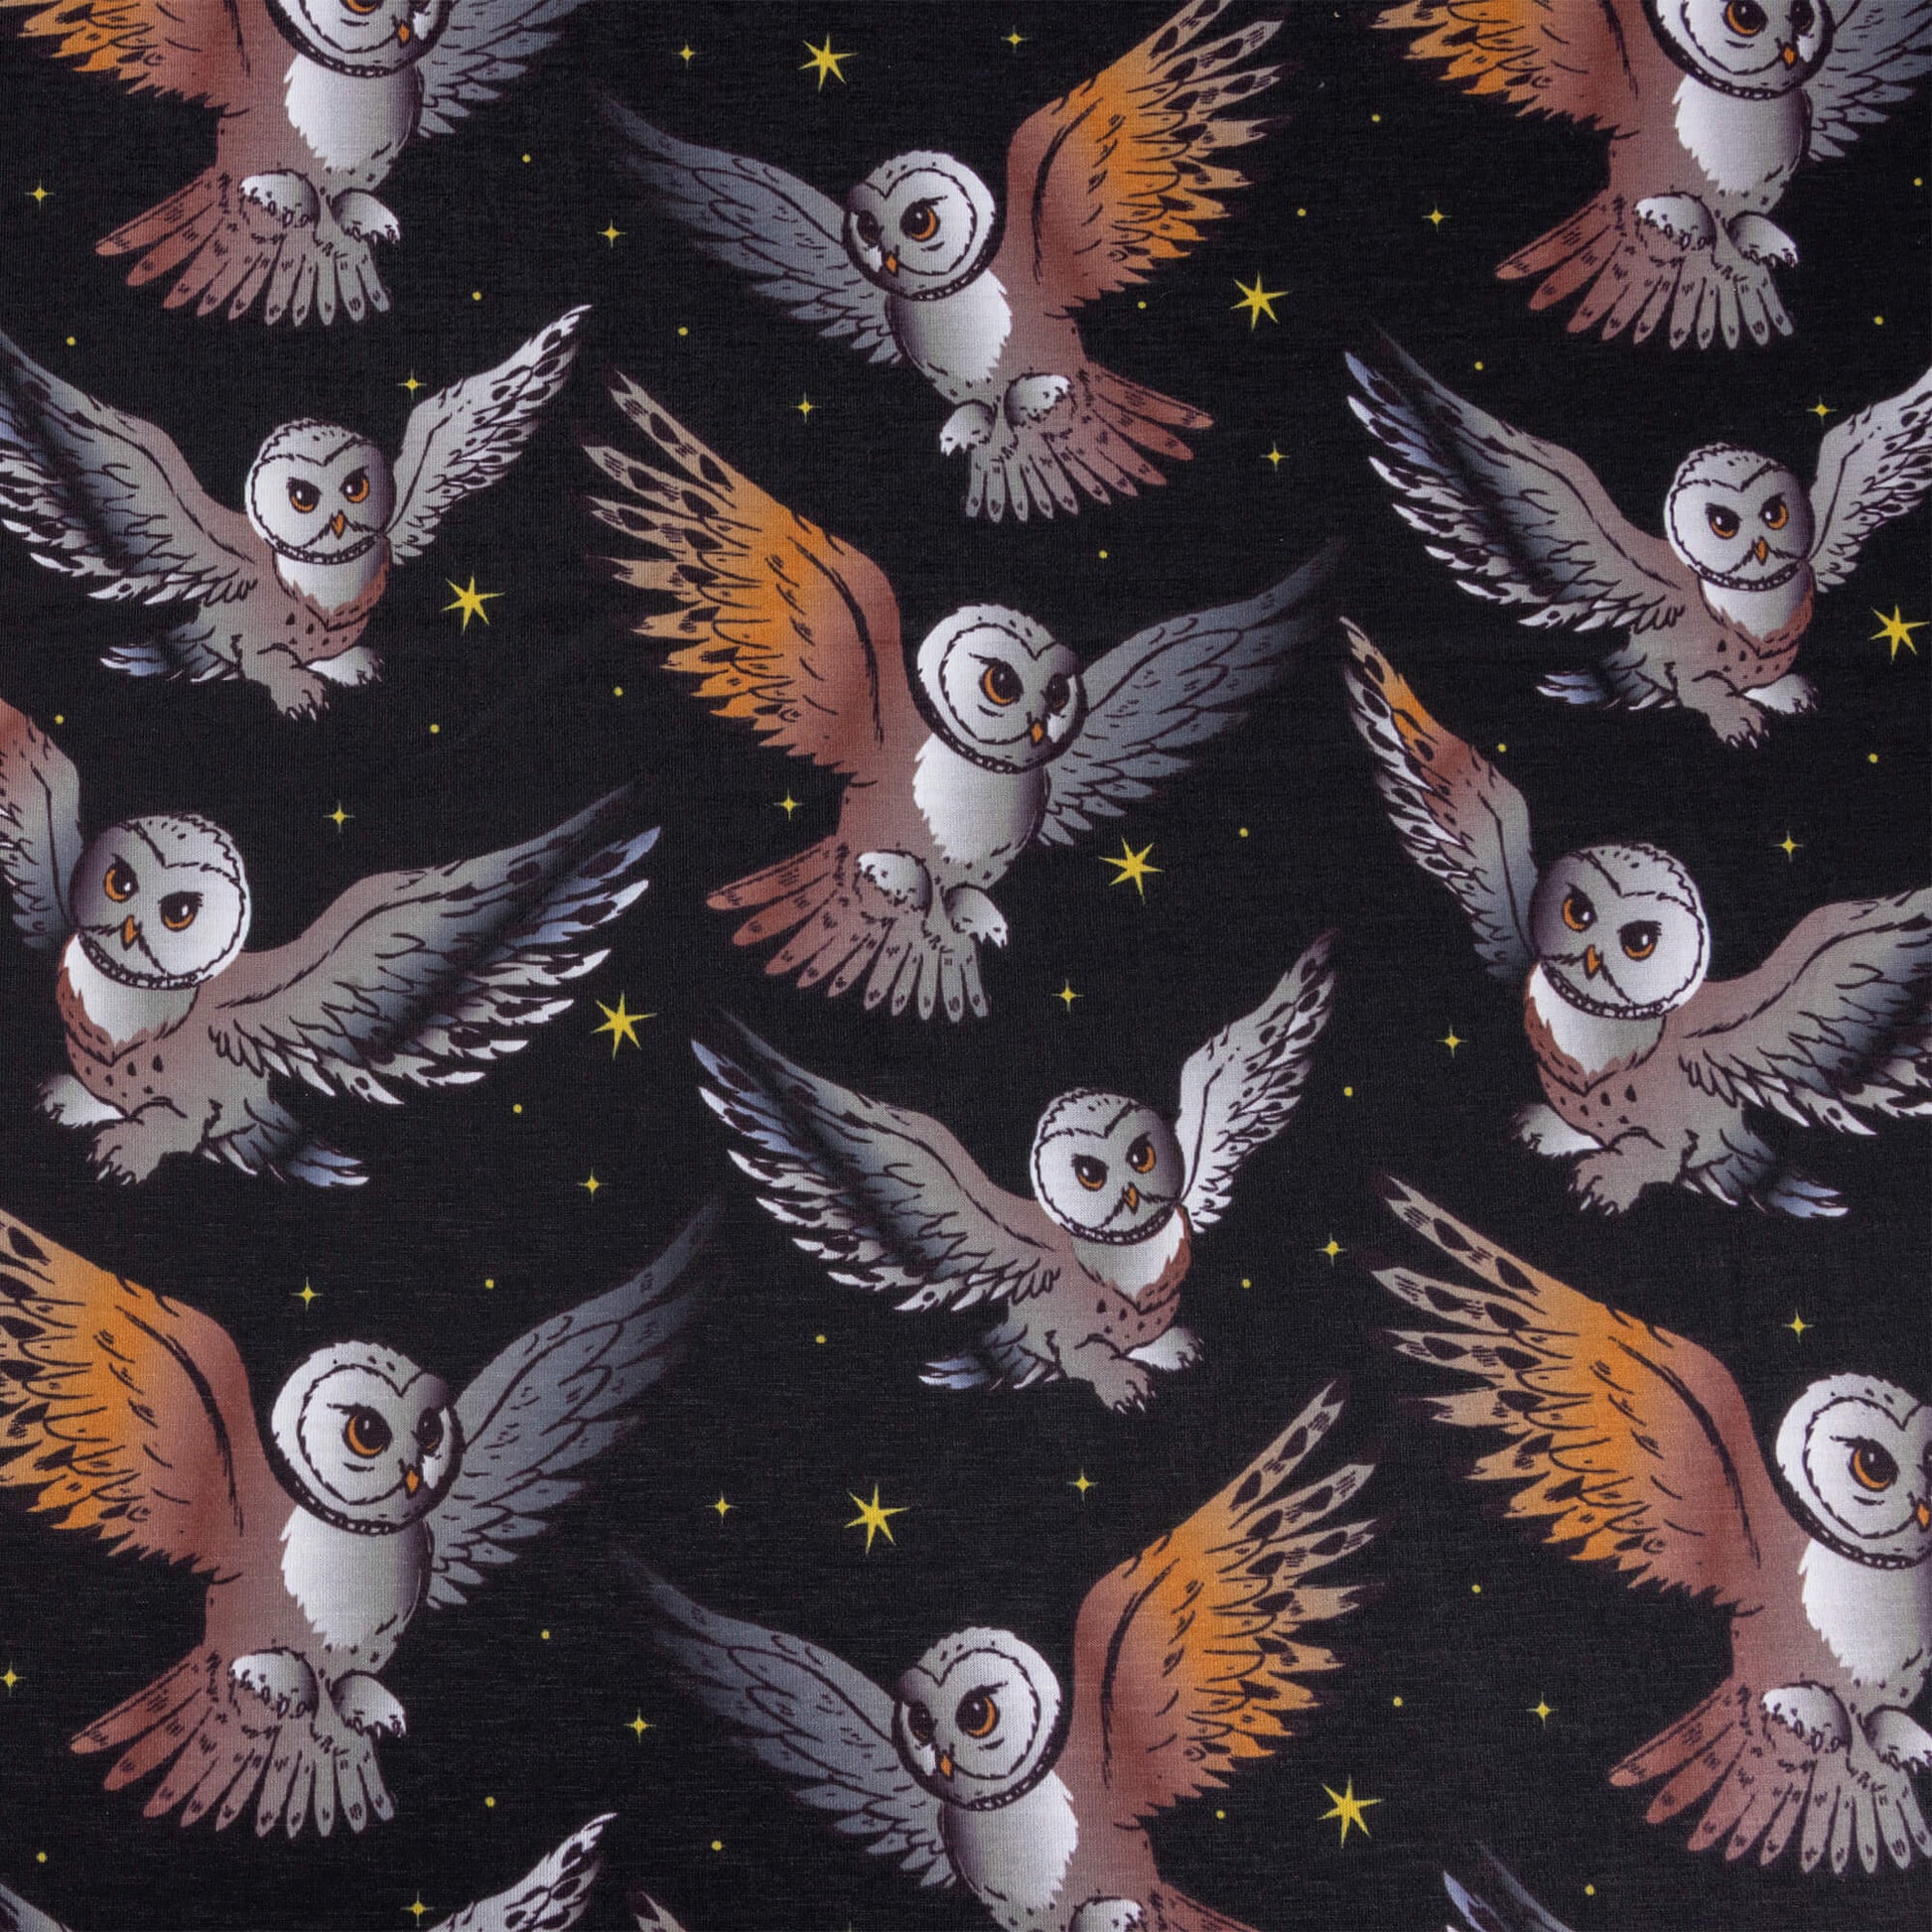 A look at the What a hoot stretch jersey fabric featuring barn owls in flight with black background and yellow twinkly stars